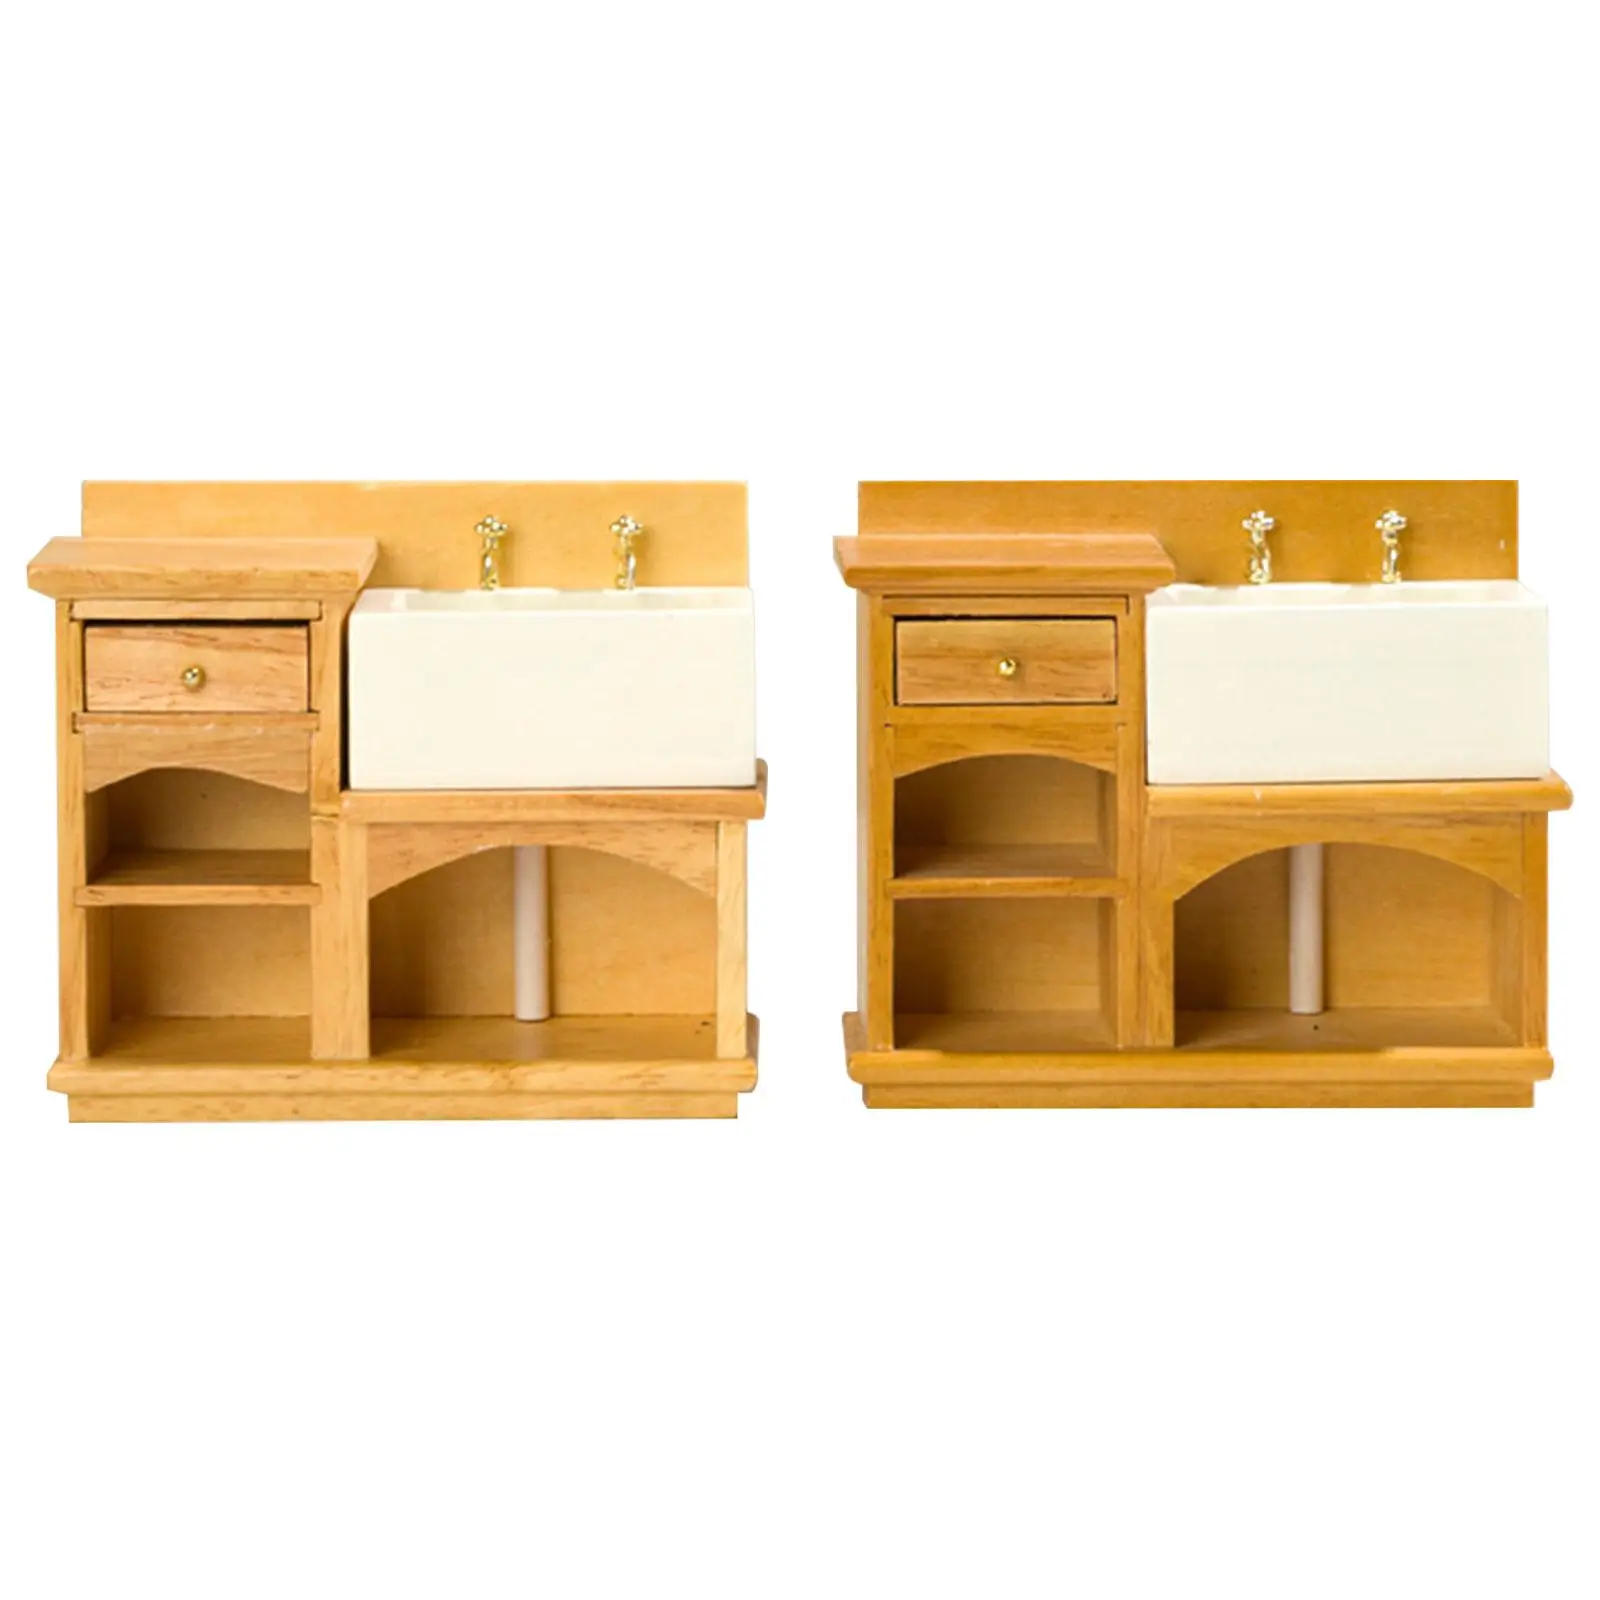 1:12 Dollhouse Wash Cabinet Model, 1:12 Wash Cabinet Model, 1:12 Miniature Cabinet Furniture for Holiday Present